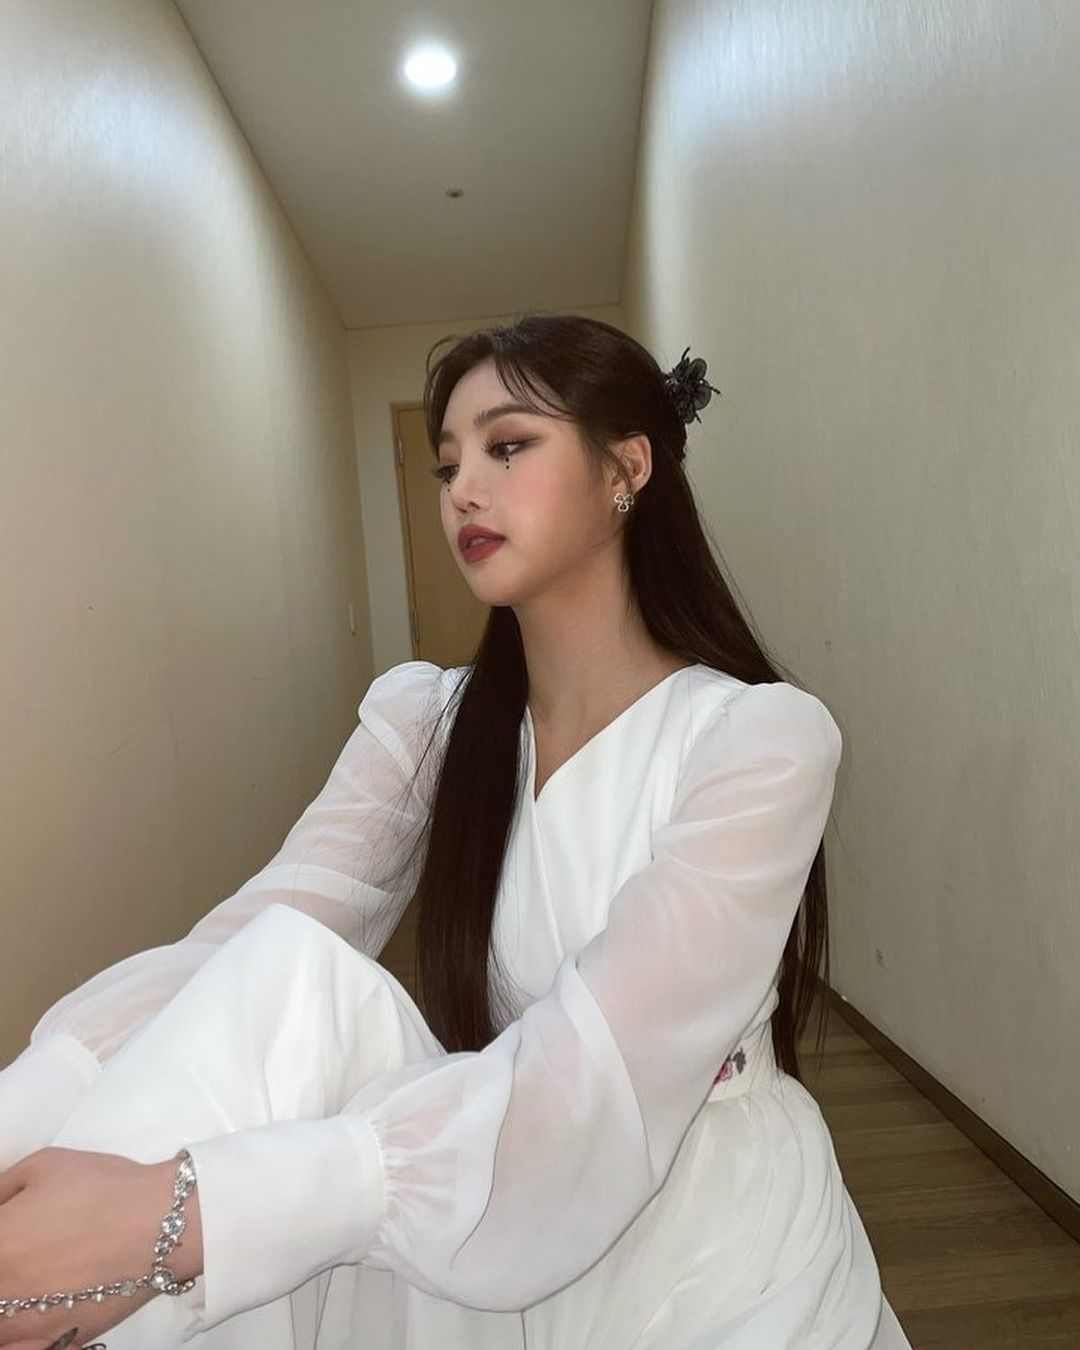 Soojin (G)I-DLE - Biography, Profile, Facts and Career